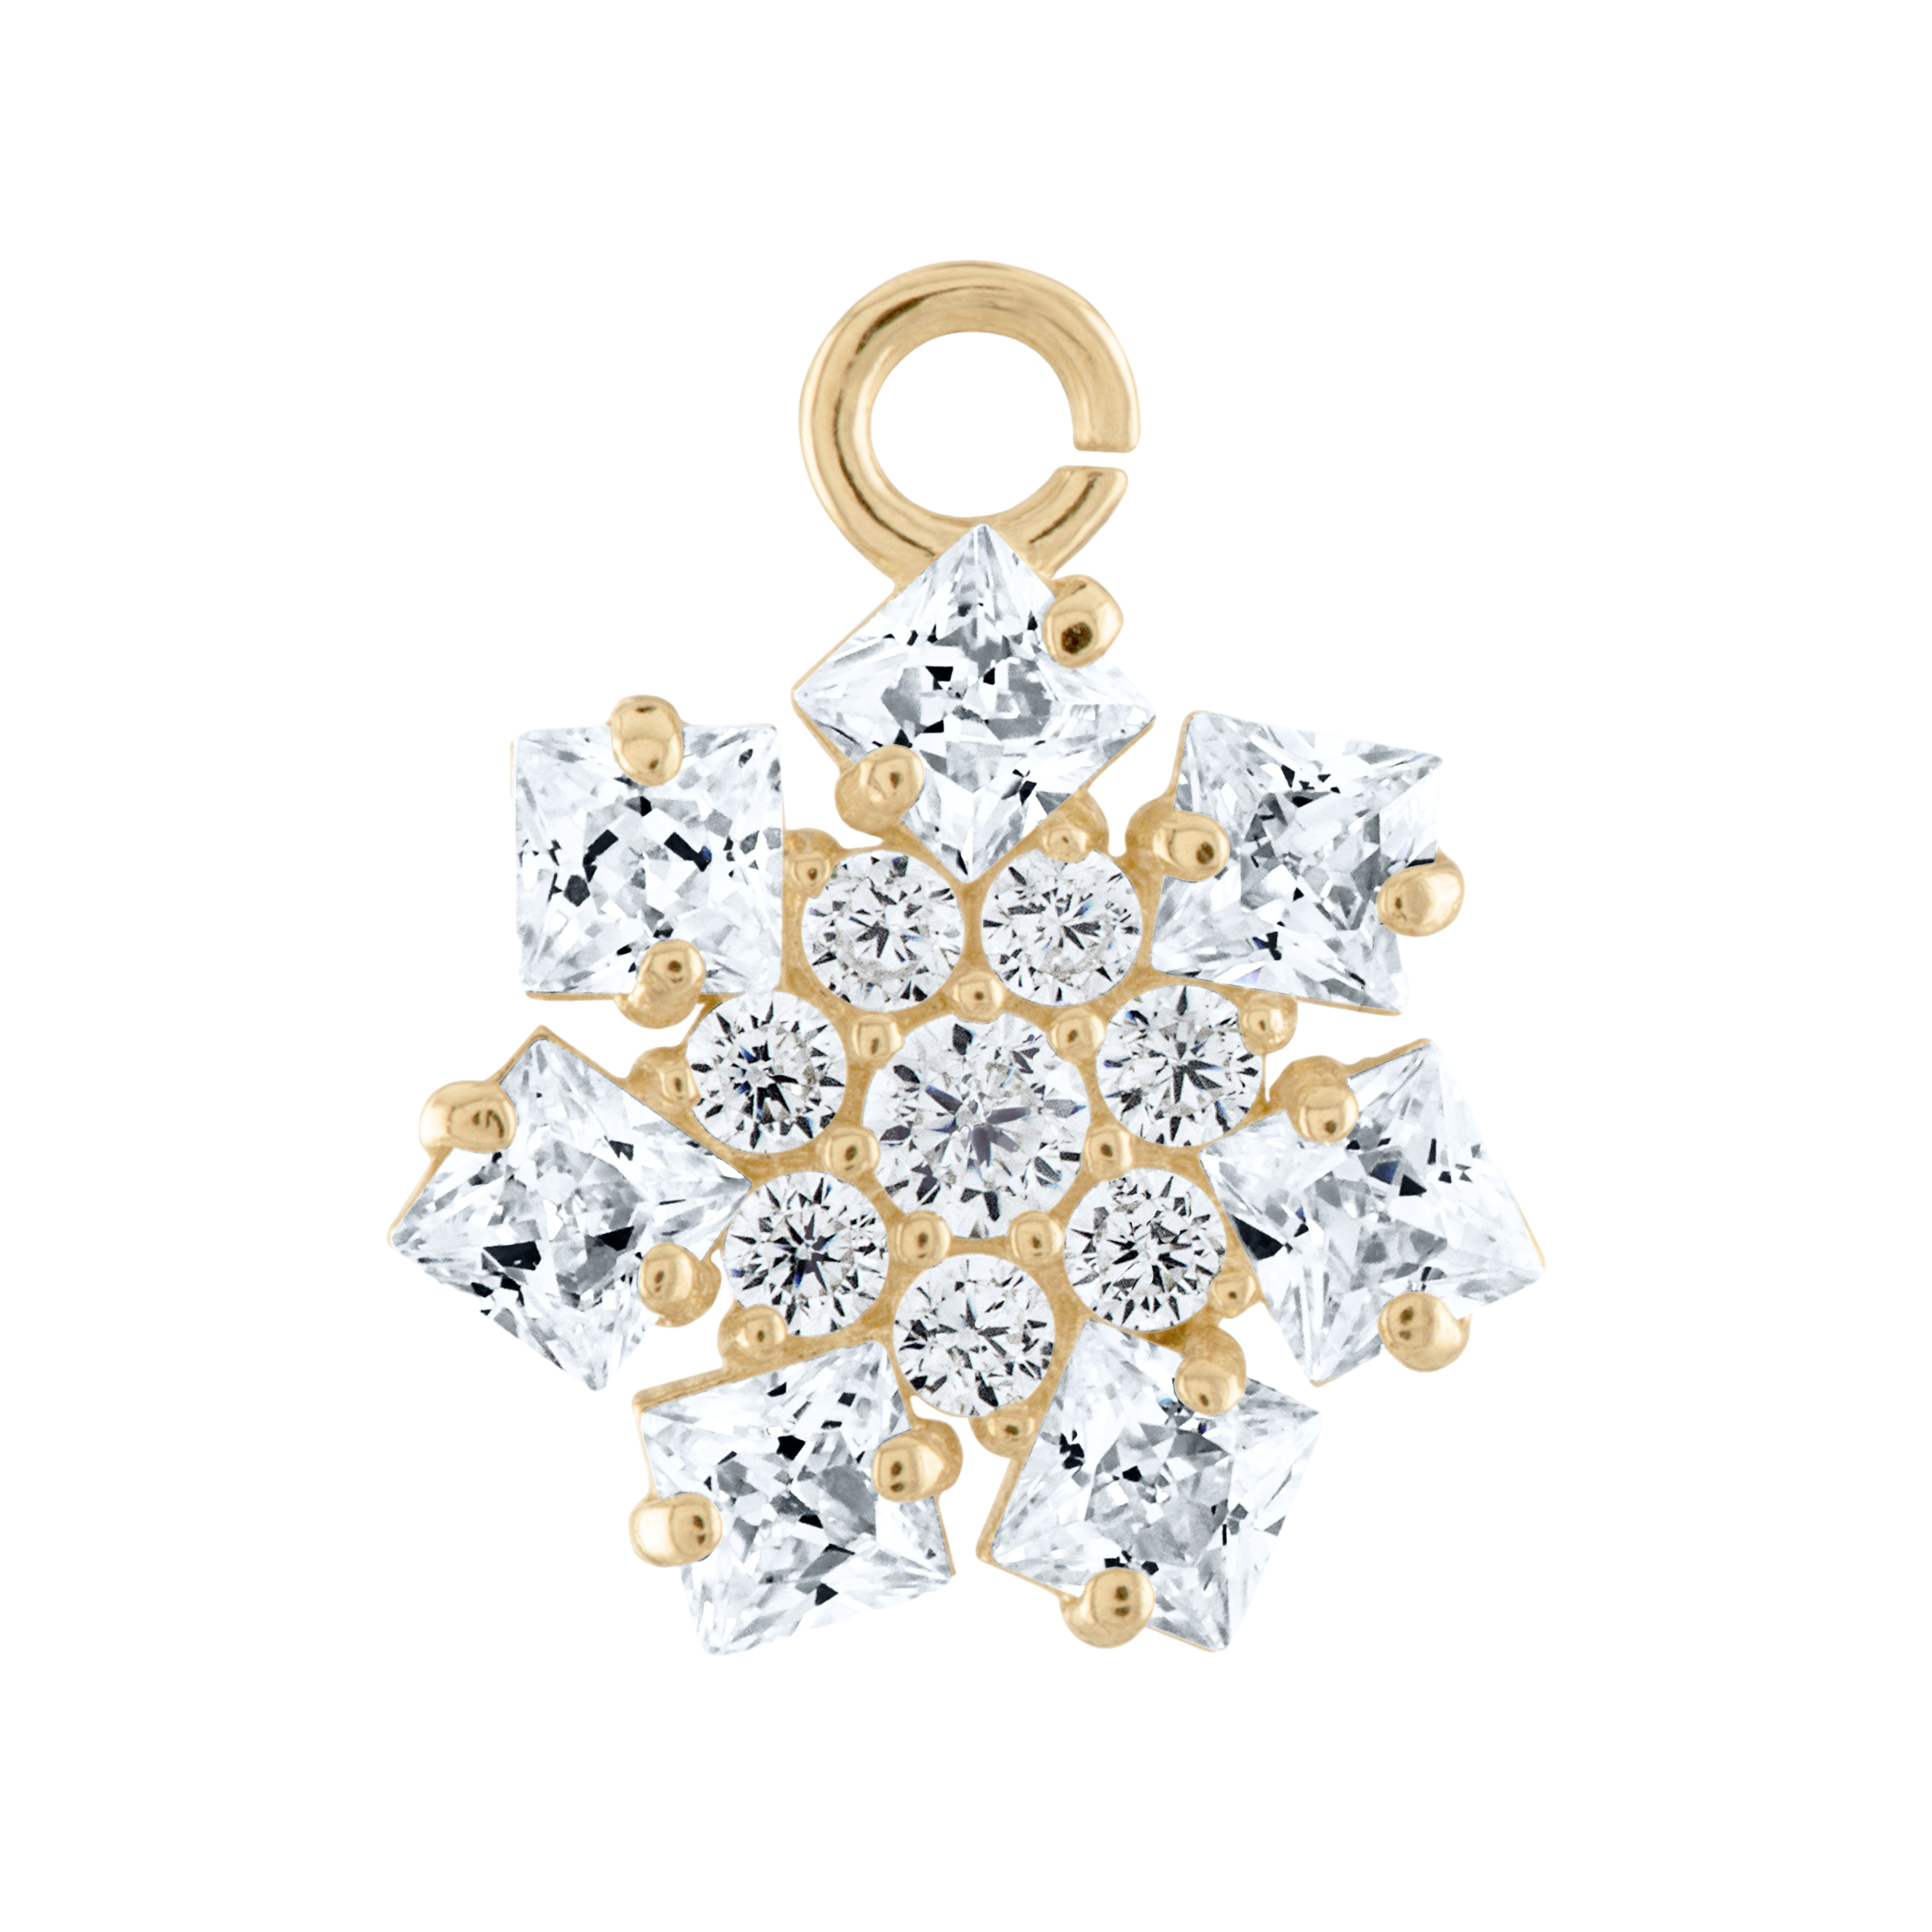 10K Solid Yellow Gold Dangling Snowflake-shaped Charm